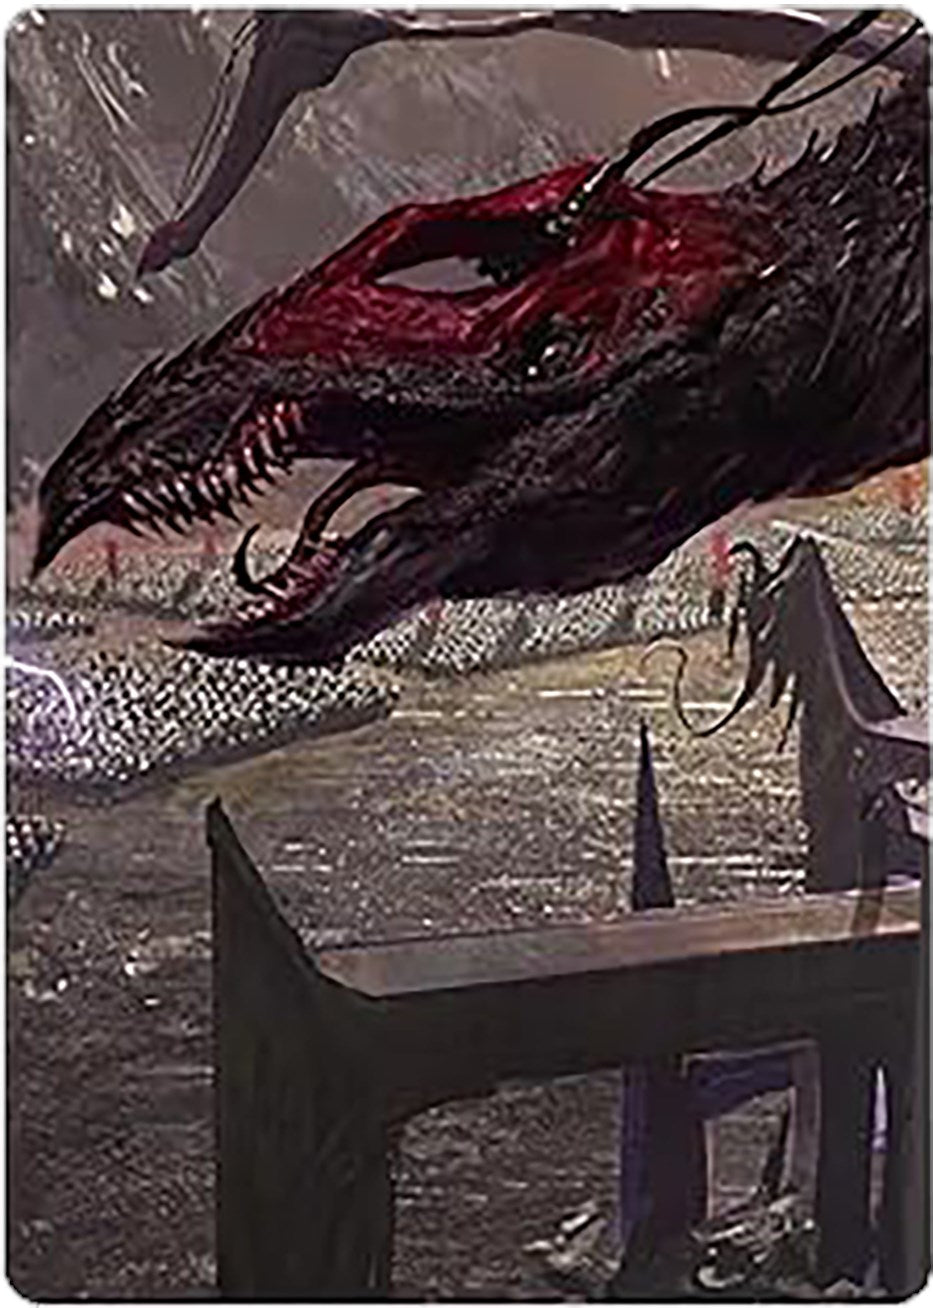 Fell Beast of Mordor Art Card [The Lord of the Rings: Tales of Middle-earth Art Series] | Devastation Store